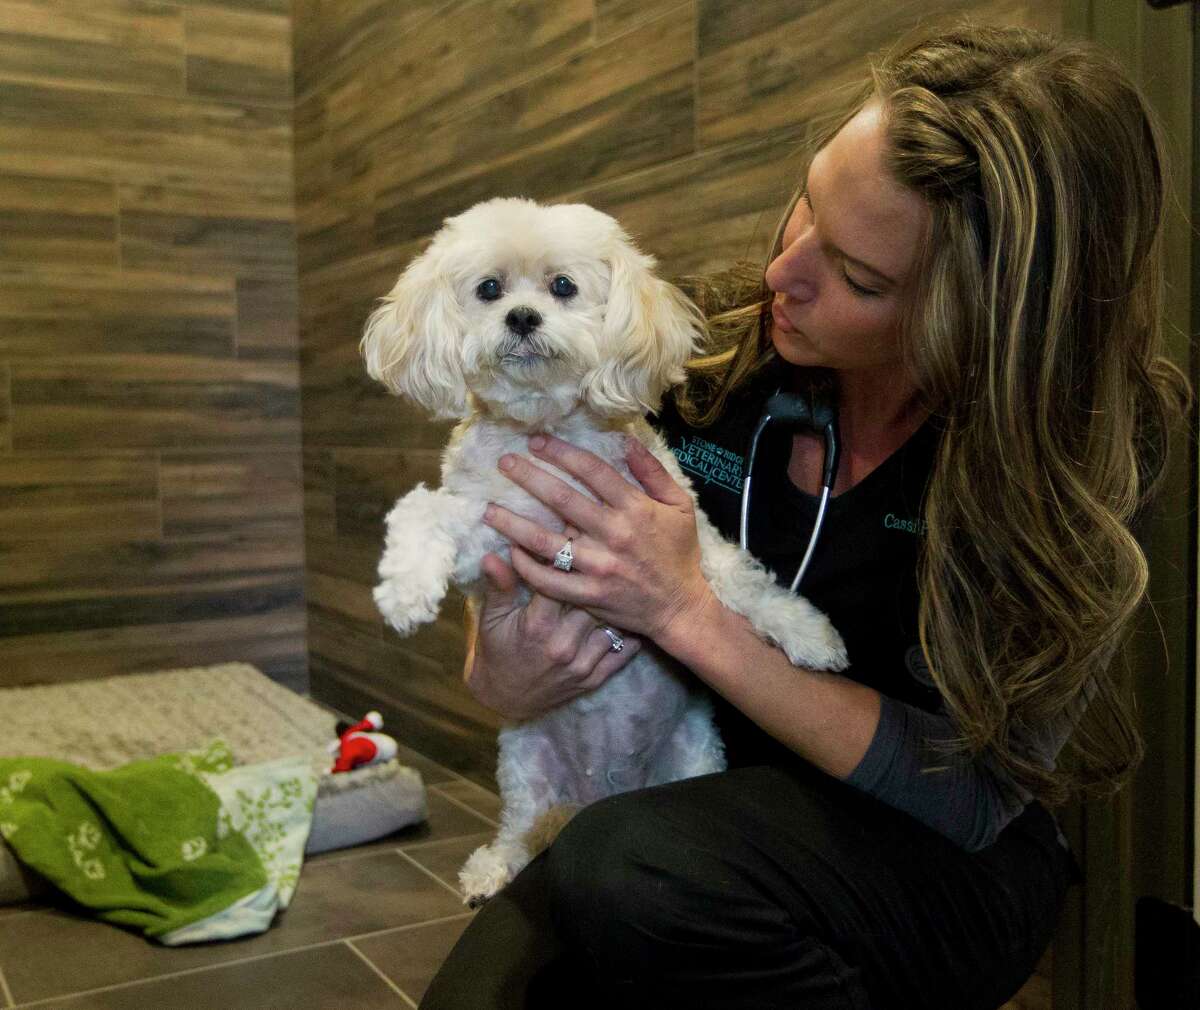 Veterinarian and owner Cassi Pettyjohn plays with a dog at Pet Resort on South Loop 336, Wednesday, Oct. 25, 2017, in Conroe. In addition to offering full veterinarian services with dentistry, surgery, wellness care and emergency care, the new business offers clients grooming, play day options, and boarding services.